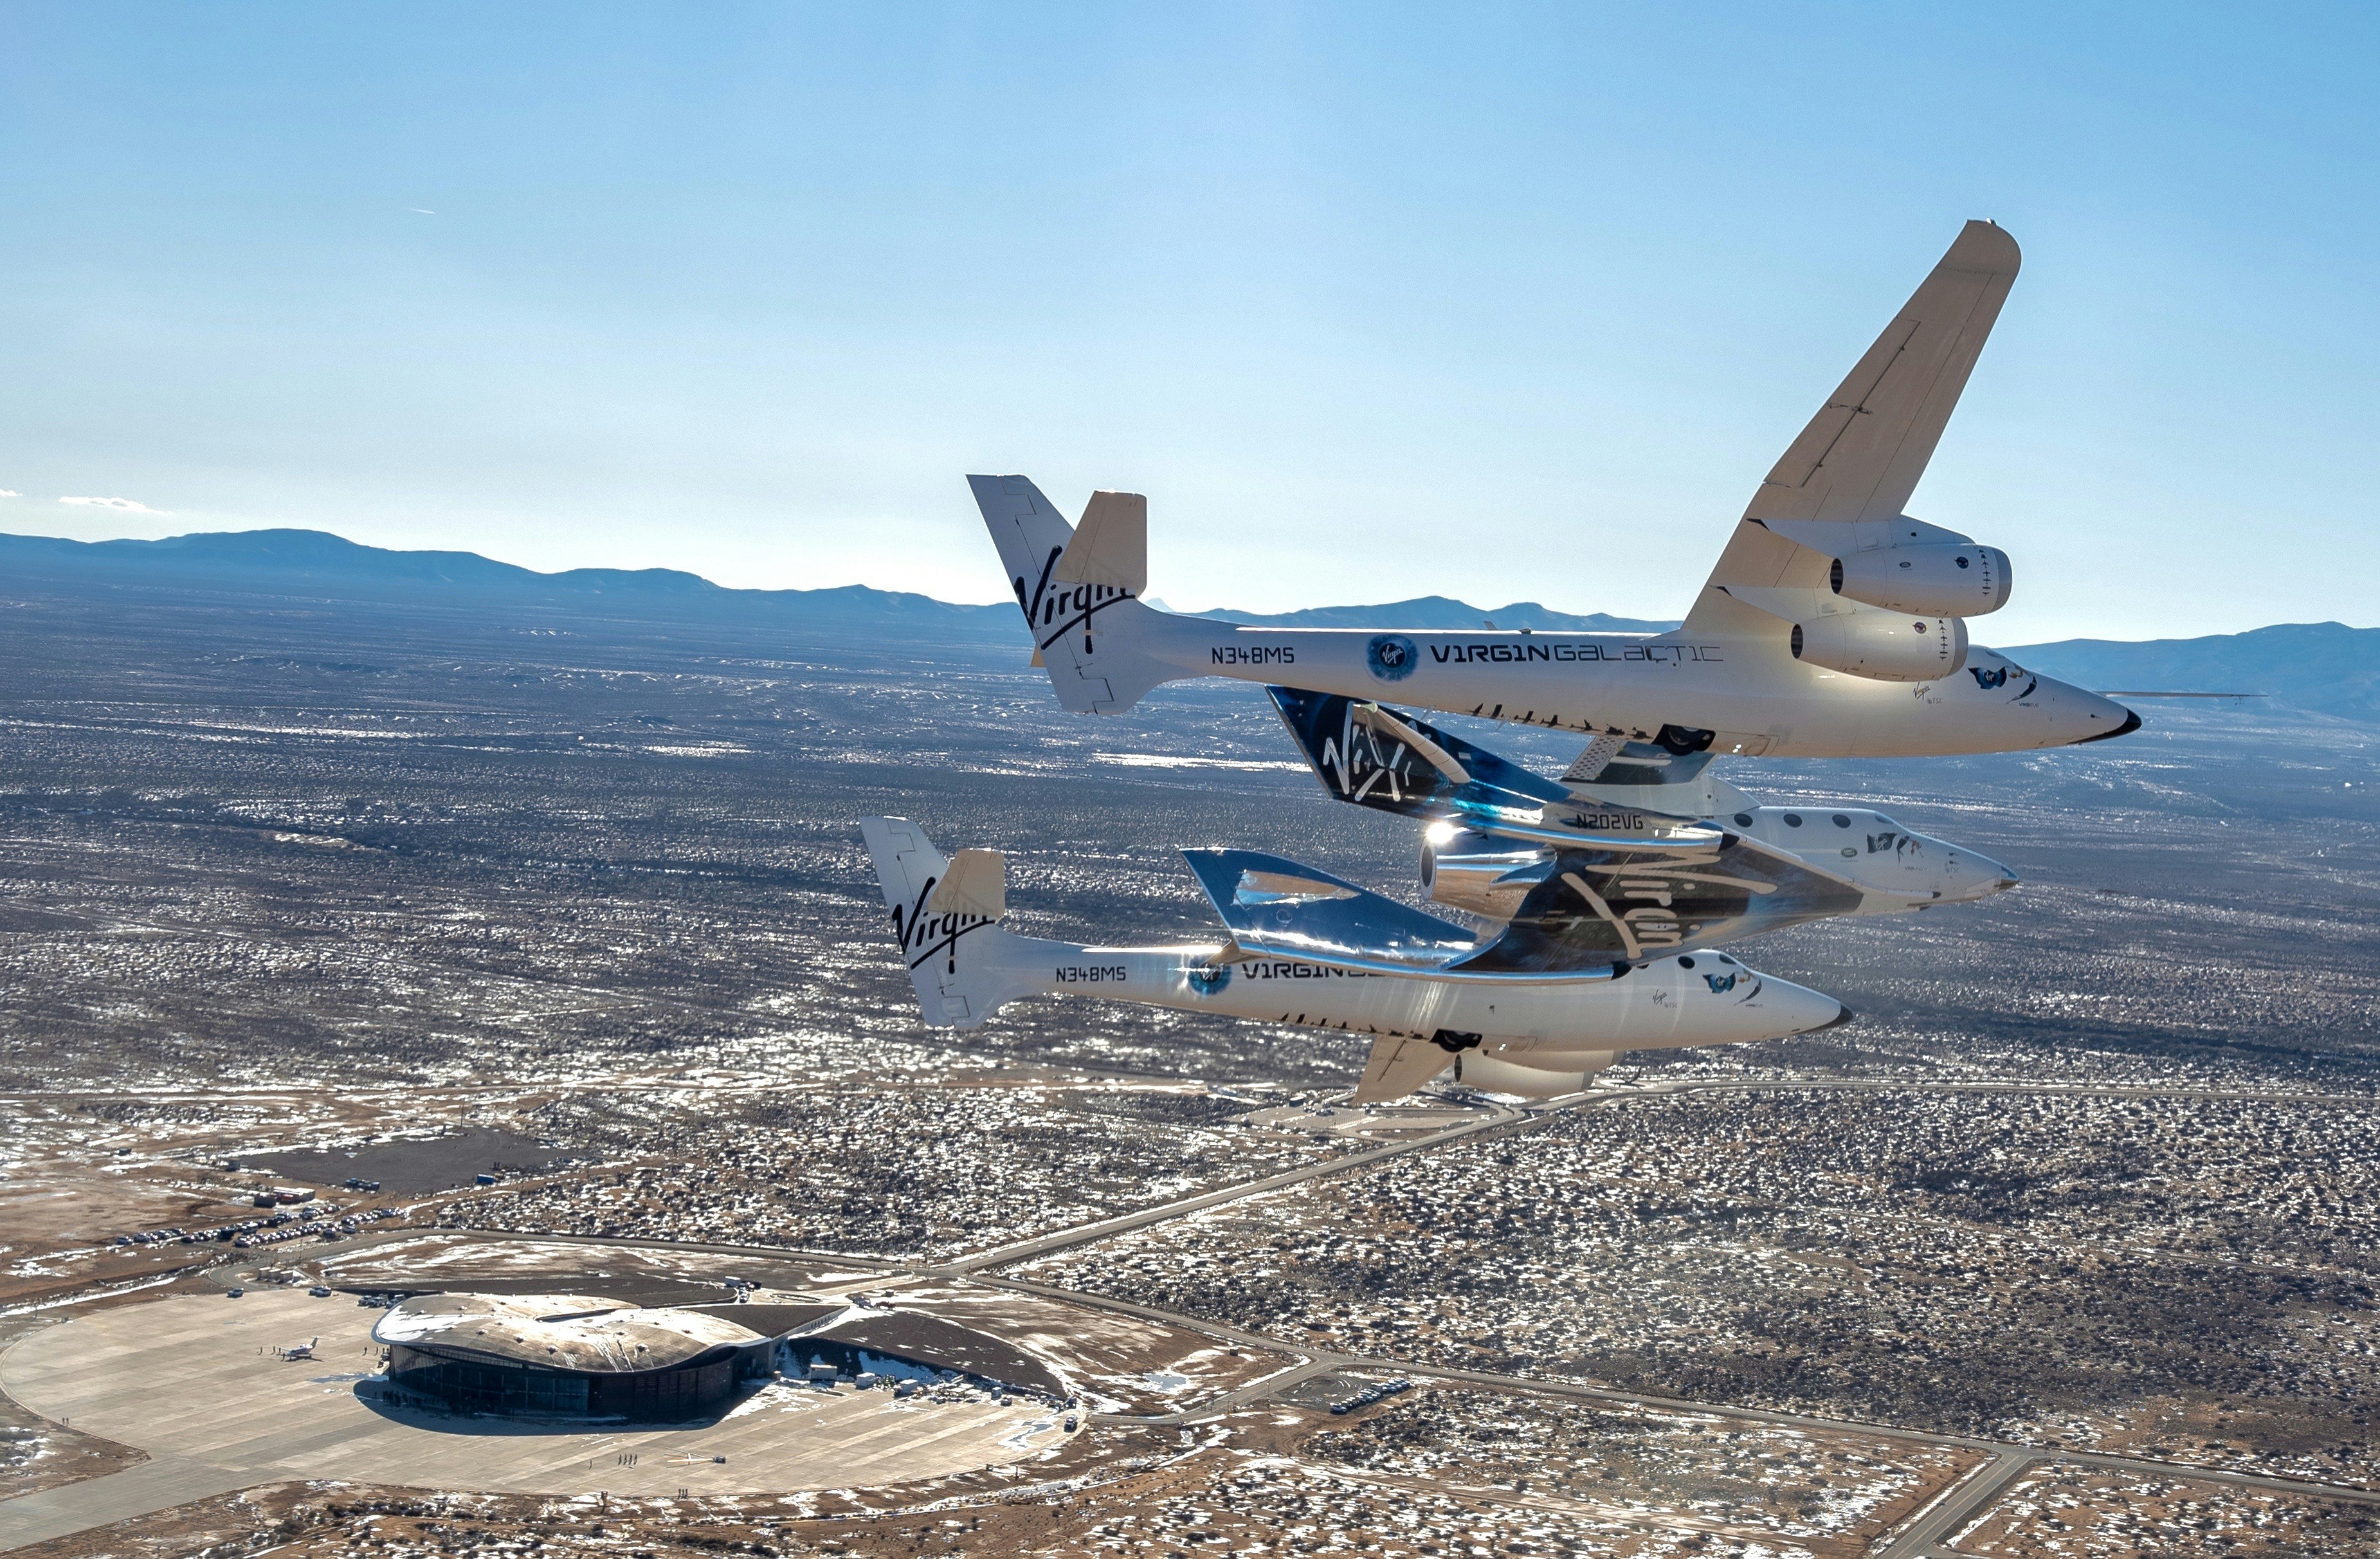 SpaceShipTwo Unity relocates to Virgin Galactic’s Gateway to Space, Spaceport America, New Mexico.